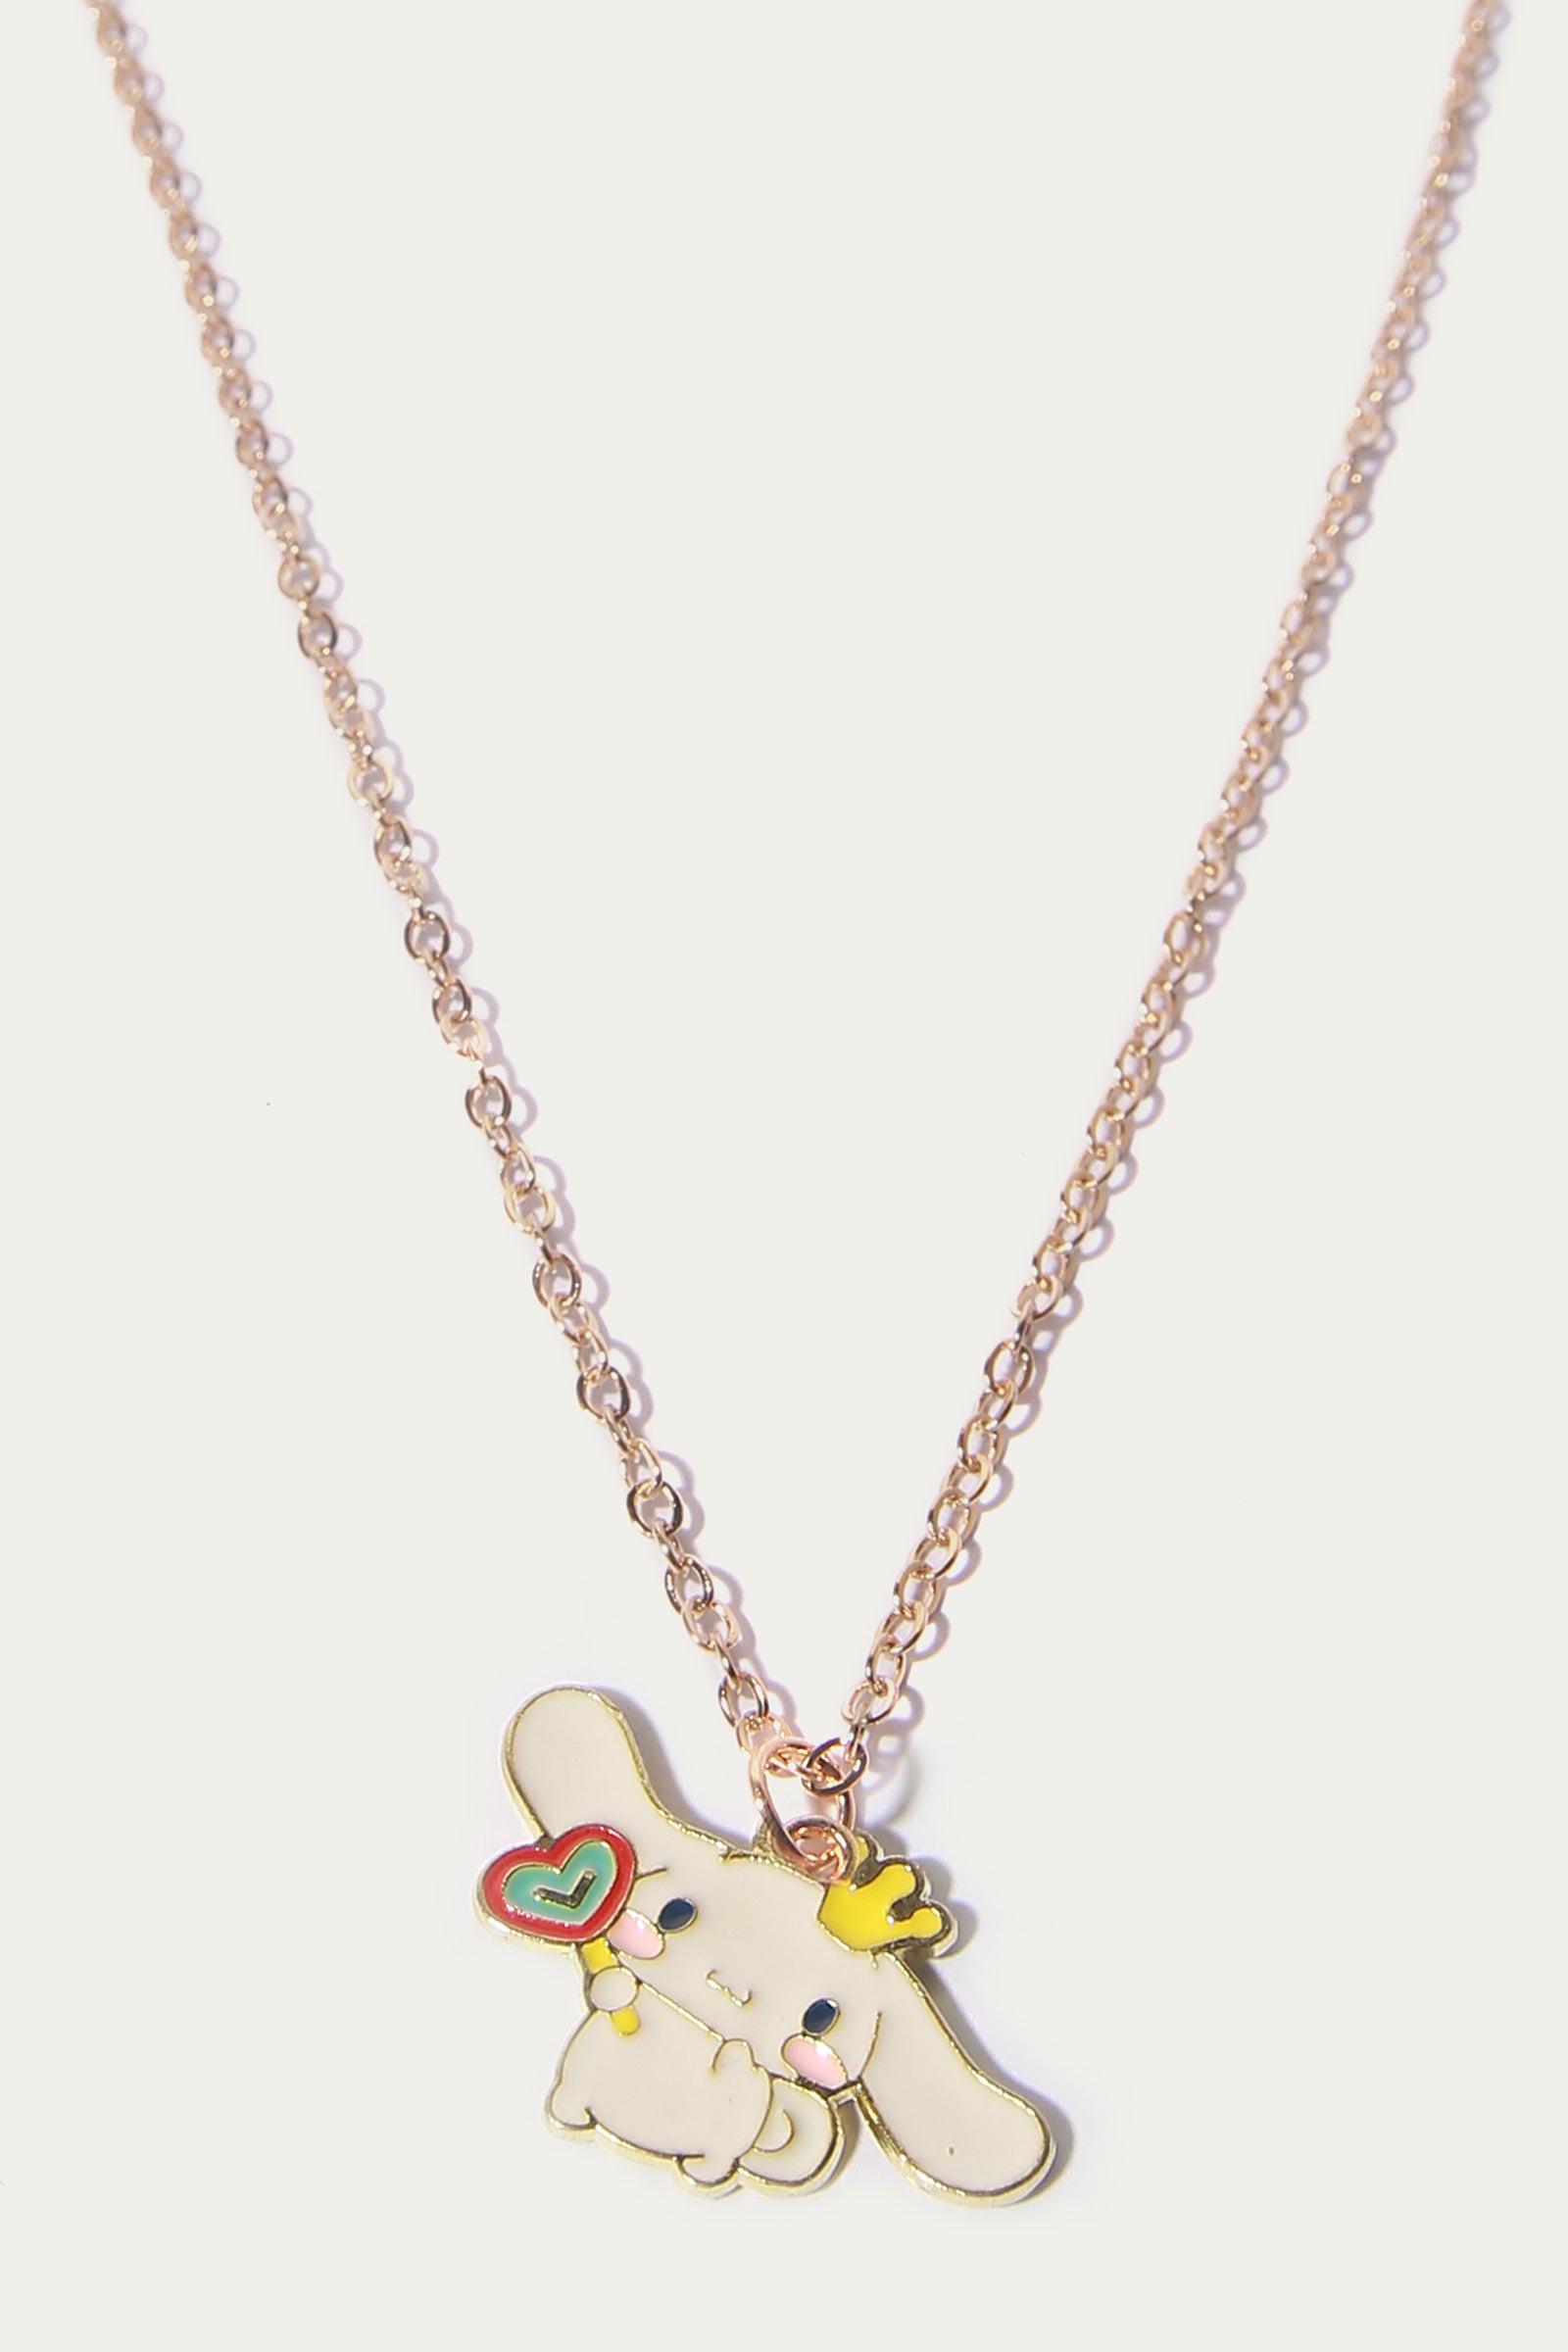 NECKLACE (GN-91)